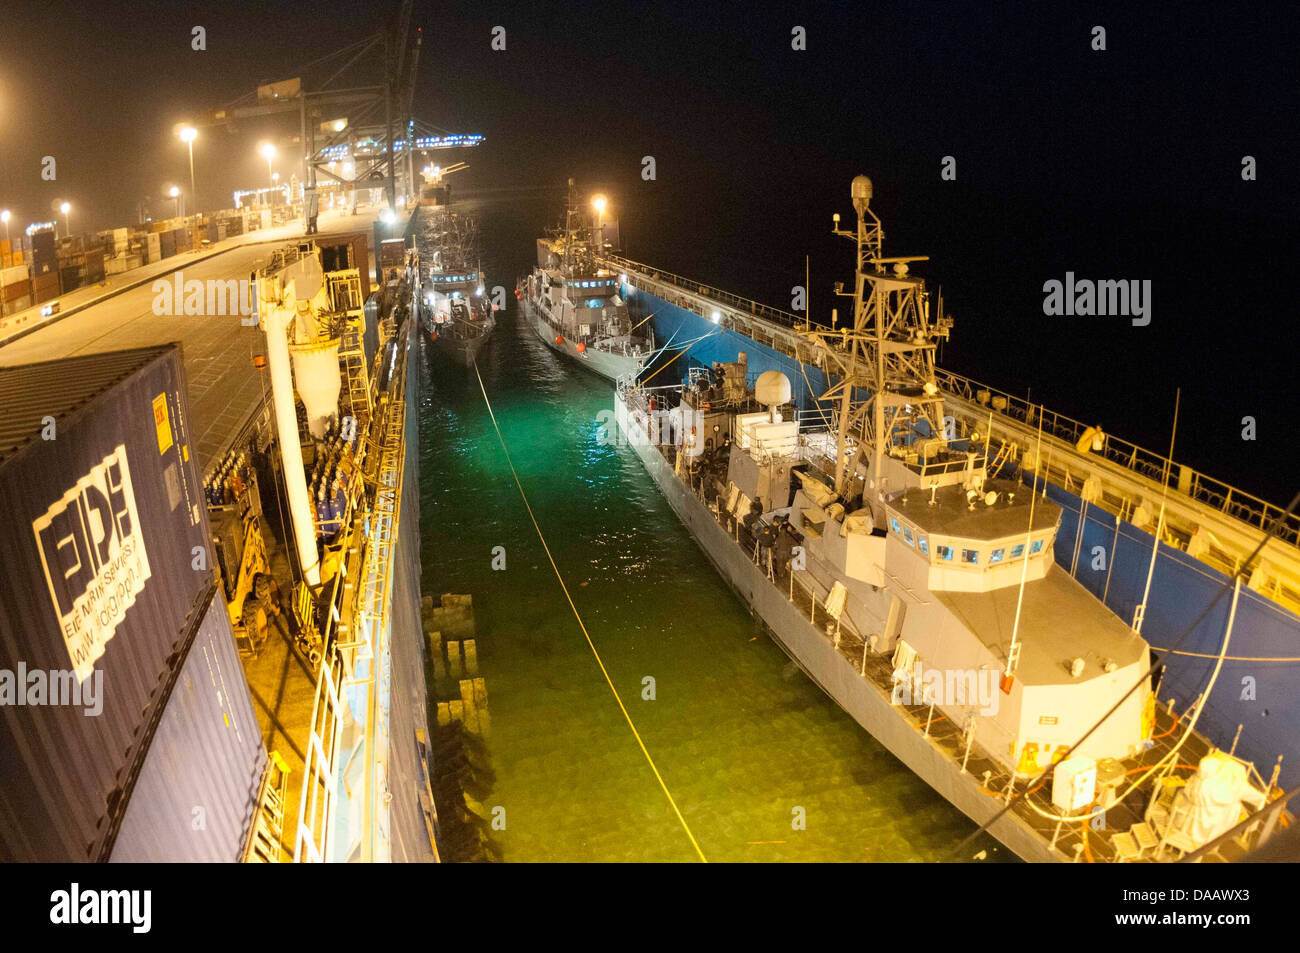 Patrol coastal ship (from left) USS Squall (PC 7), USS Thunderbolt (PC 12), and USS Tempest (PC 2) prepare to float off the motor transport vessel M/V Eide Transporter. The PCs’ arrival brings the total number to eight PCs here to support maritime securit Stock Photo